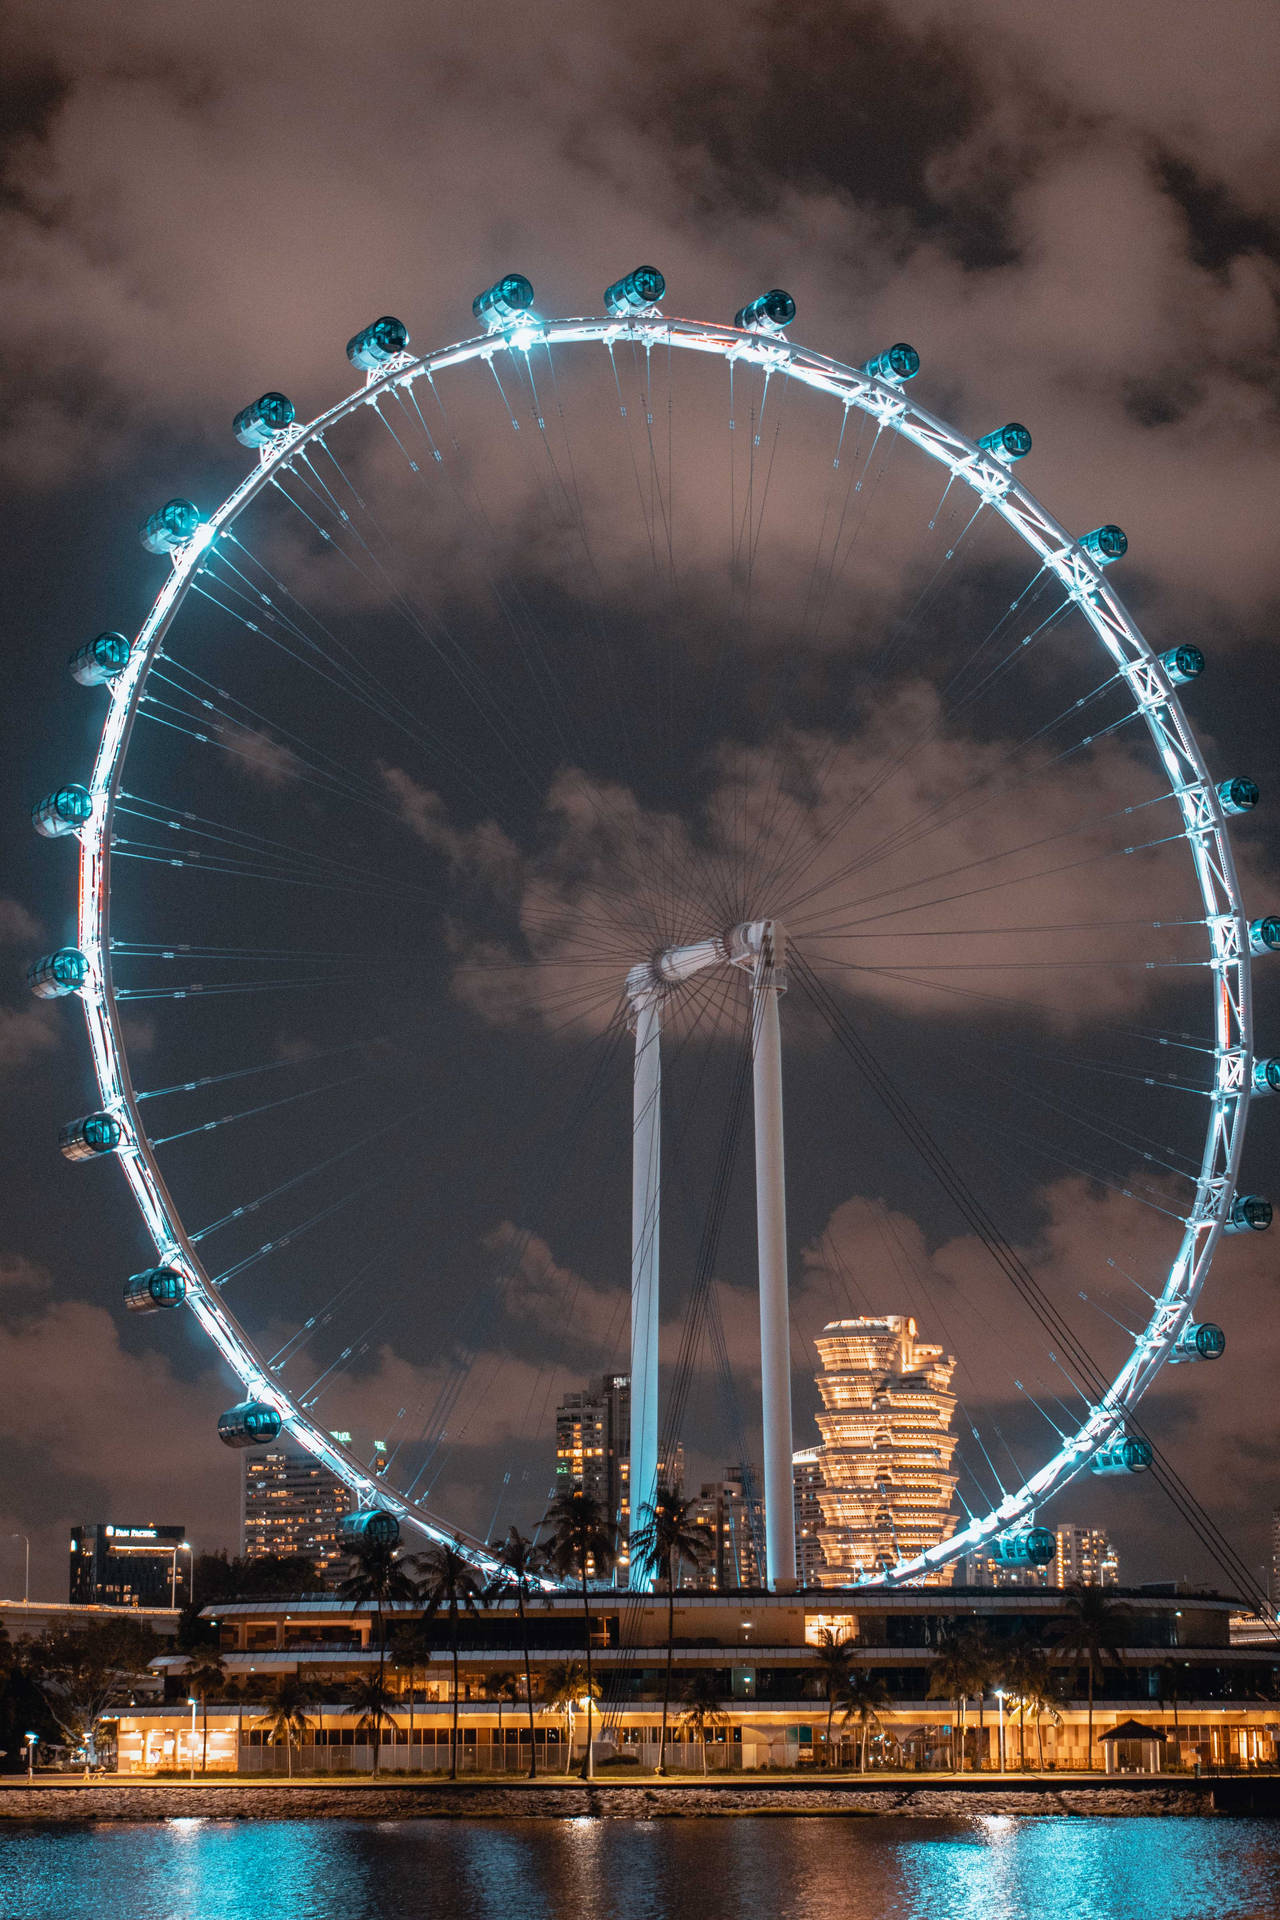 The Singapore Flyer Attraction